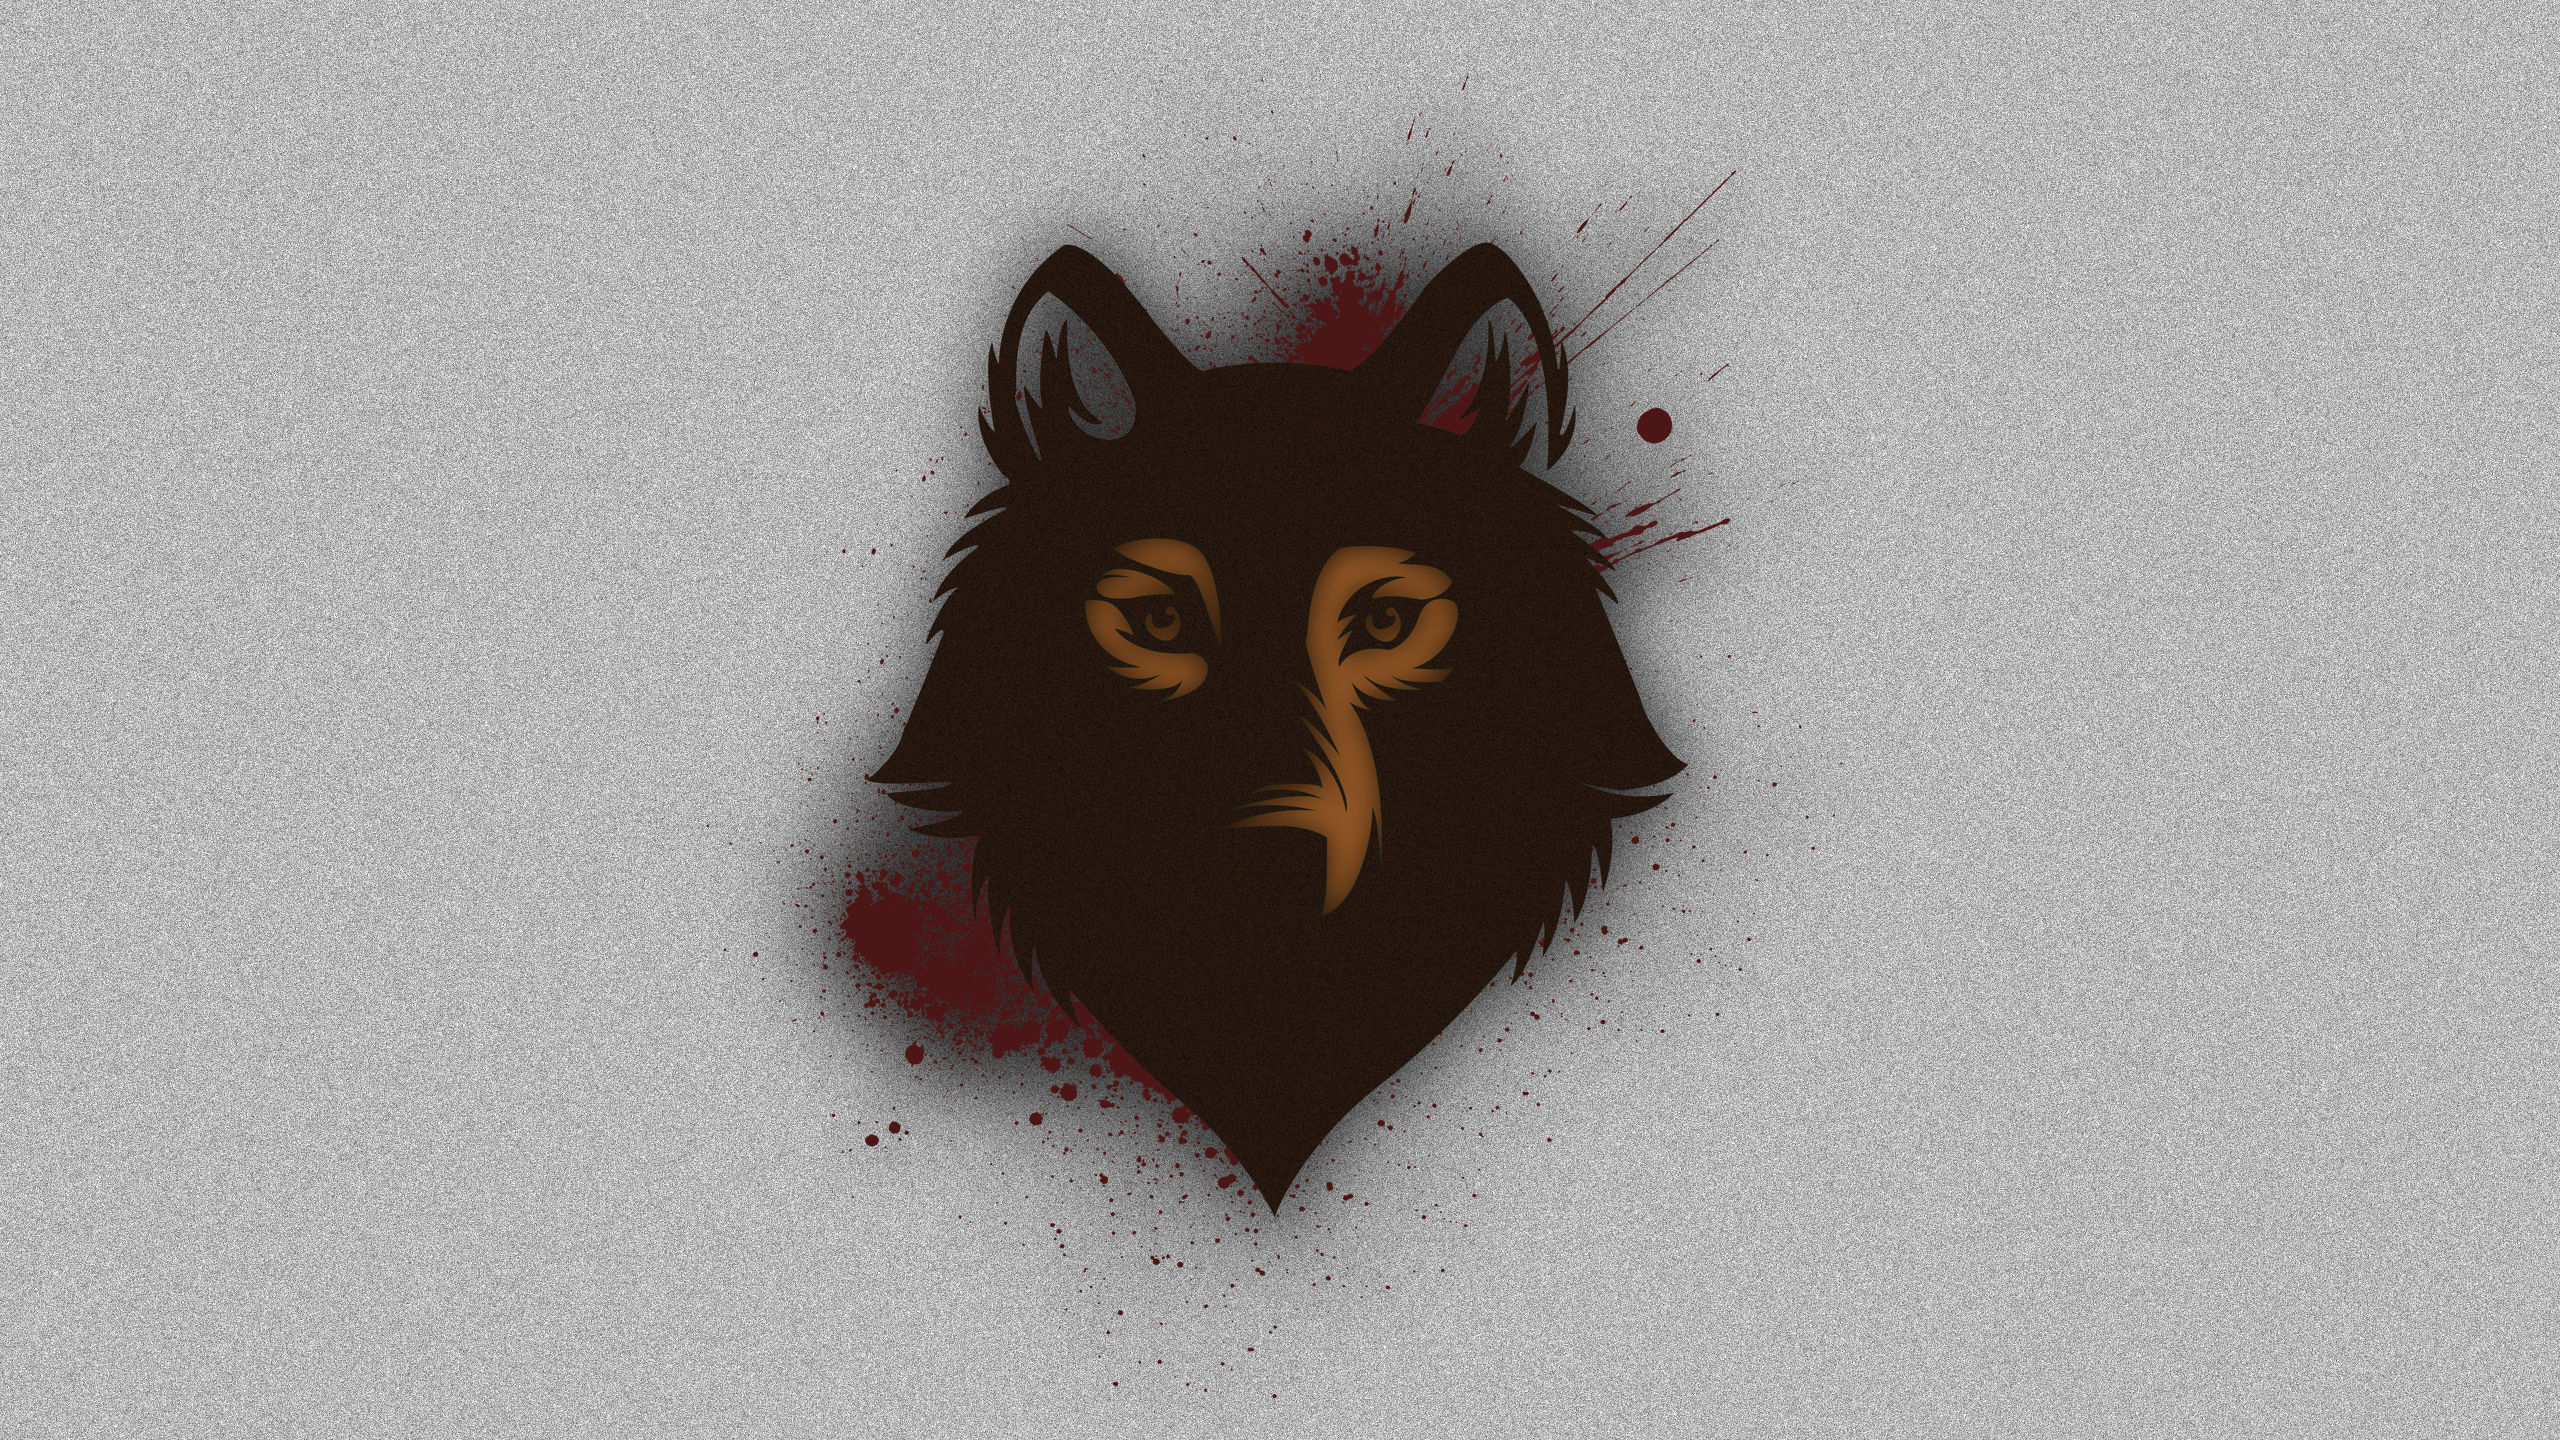 General 2560x1440 artwork simple background animals wolf abstract